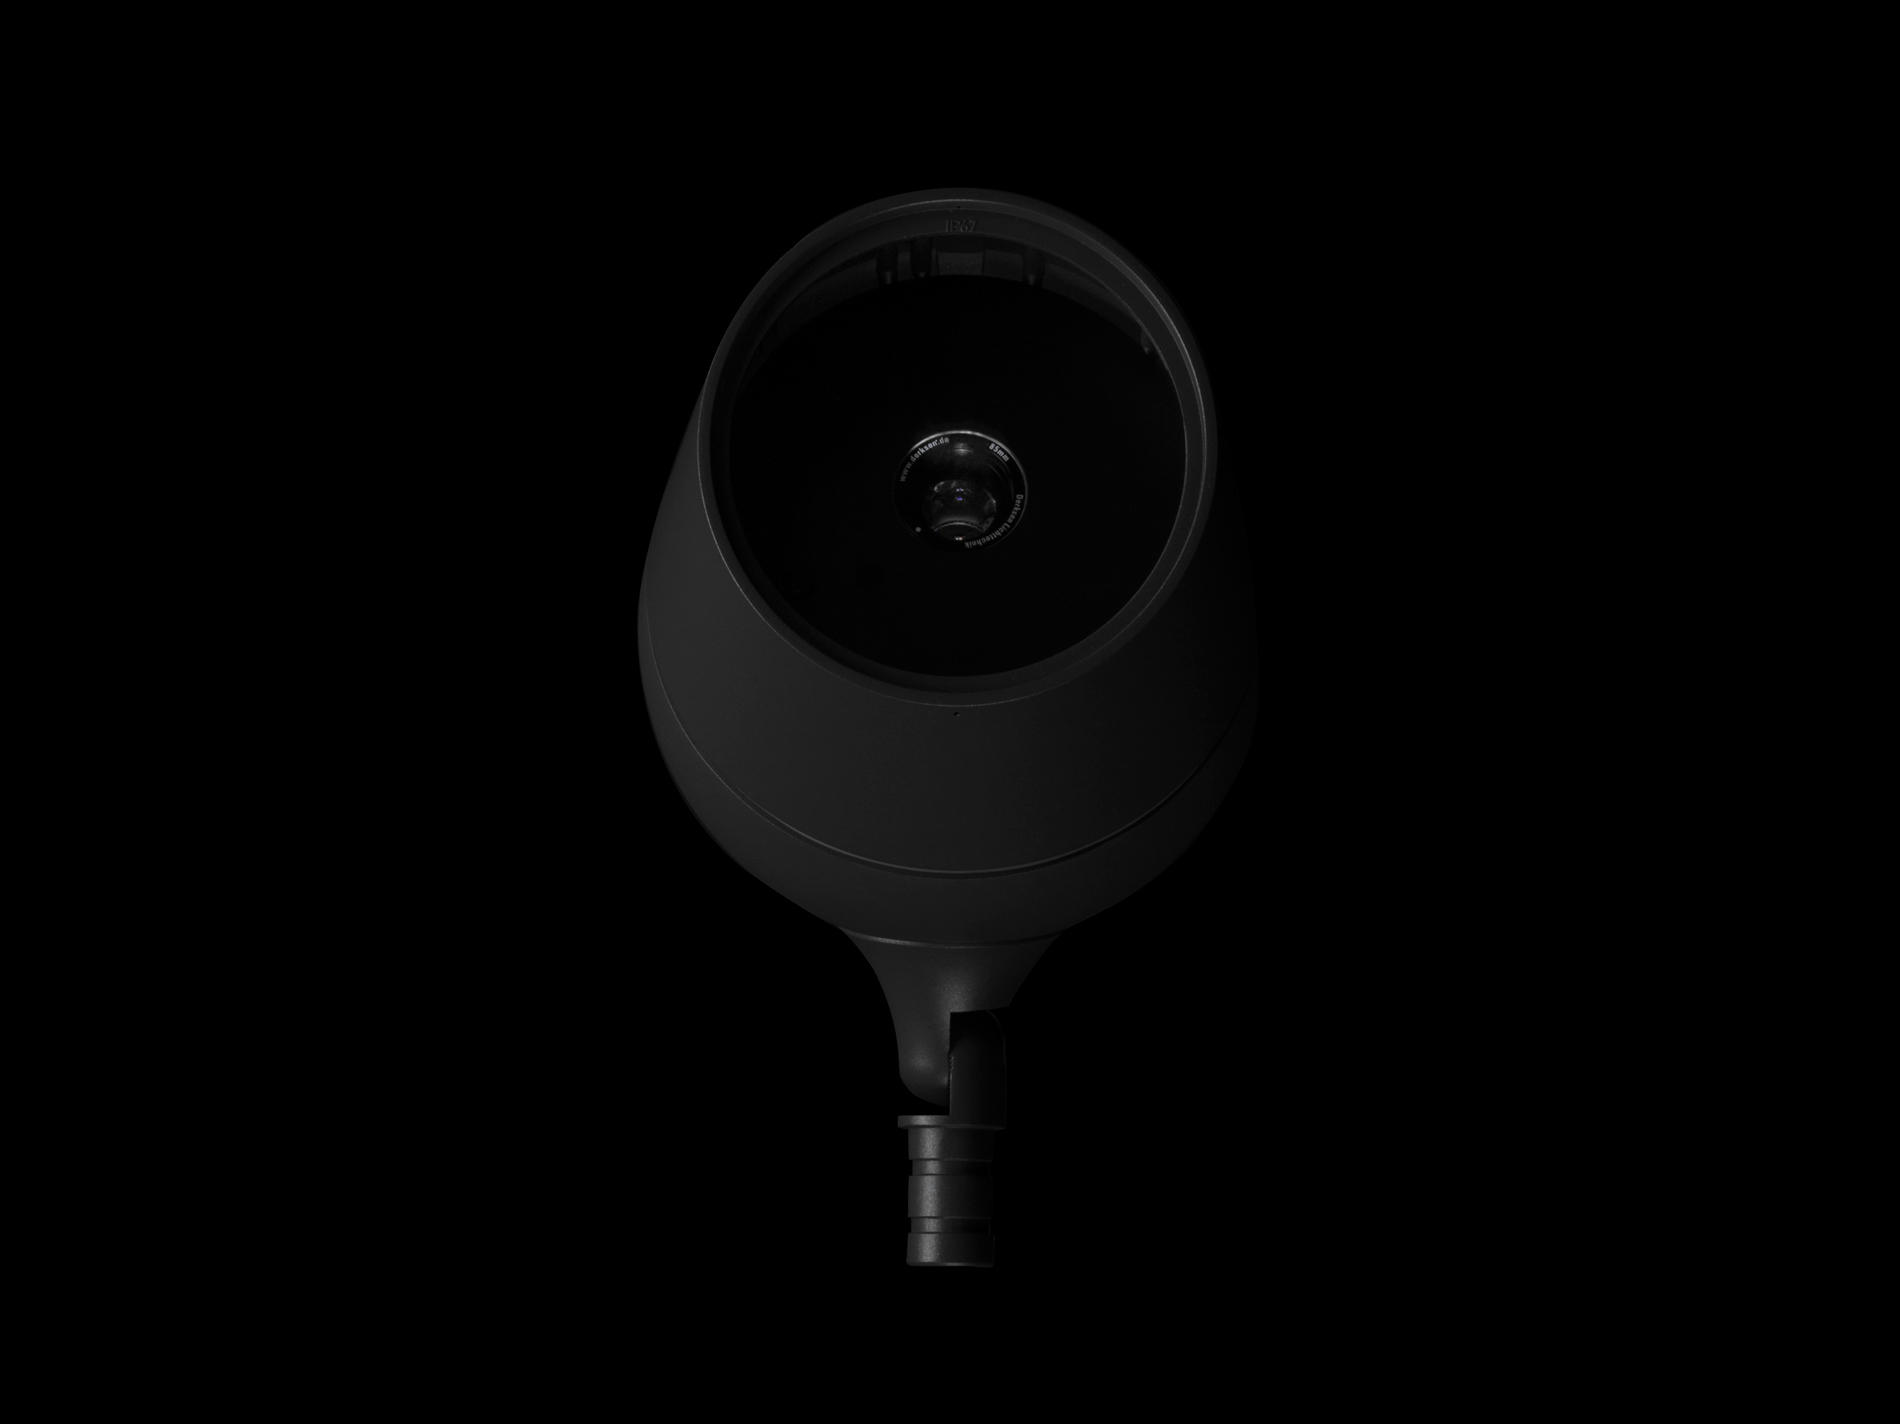 An image of Olivio luminaire featuring Gobo projector on a black background.